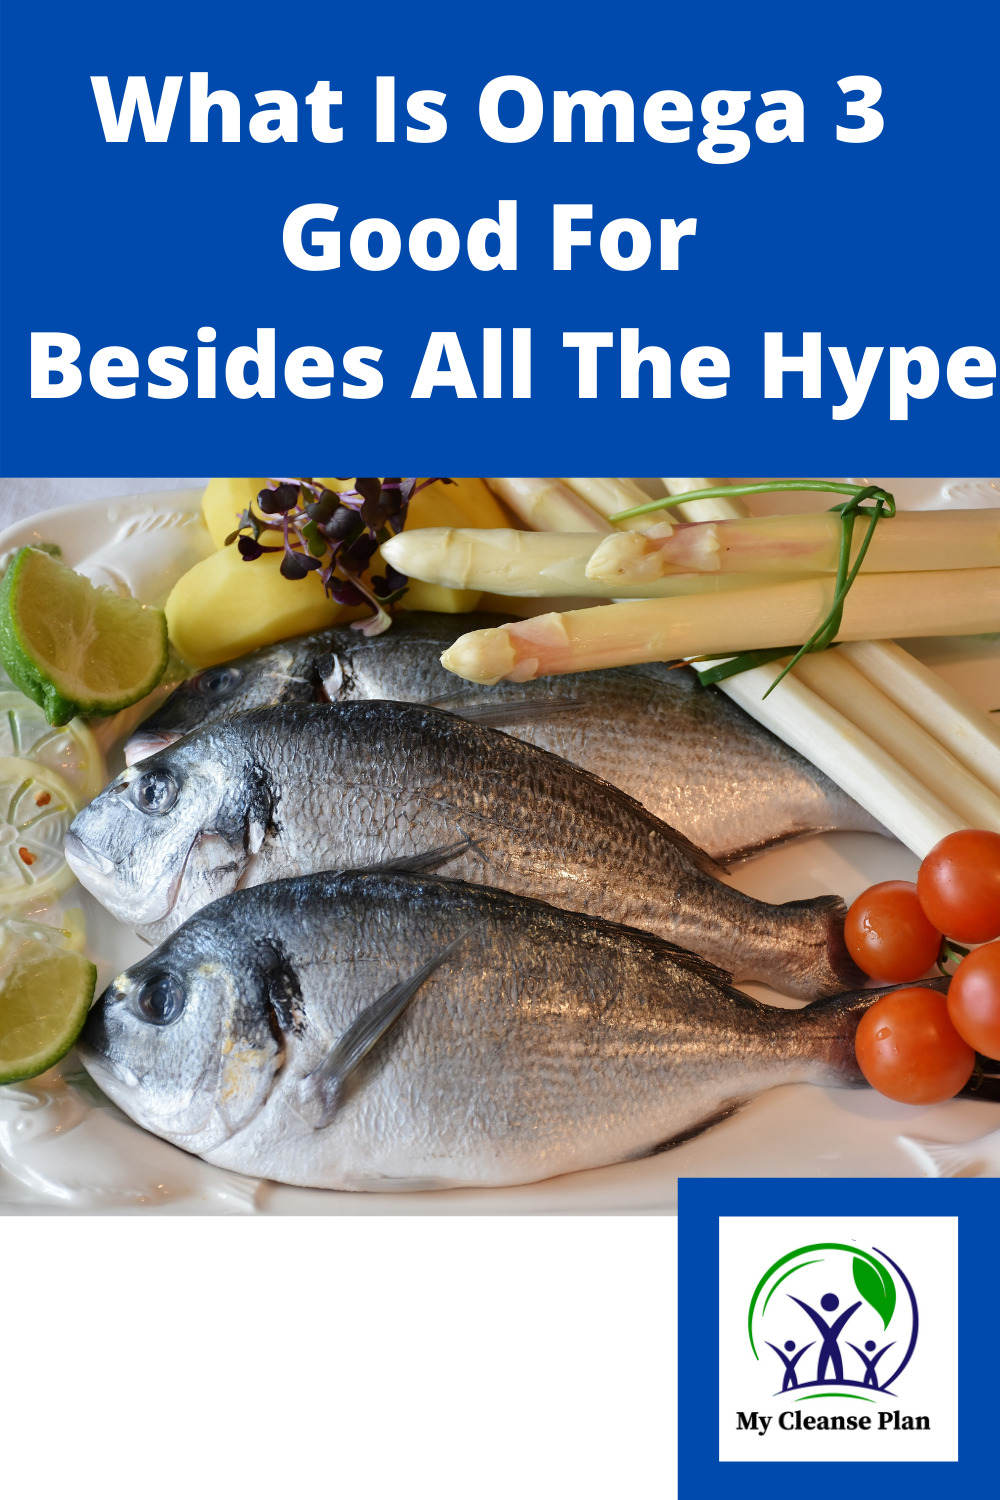 What Is Omega 3 Good For – Besides All The Hype